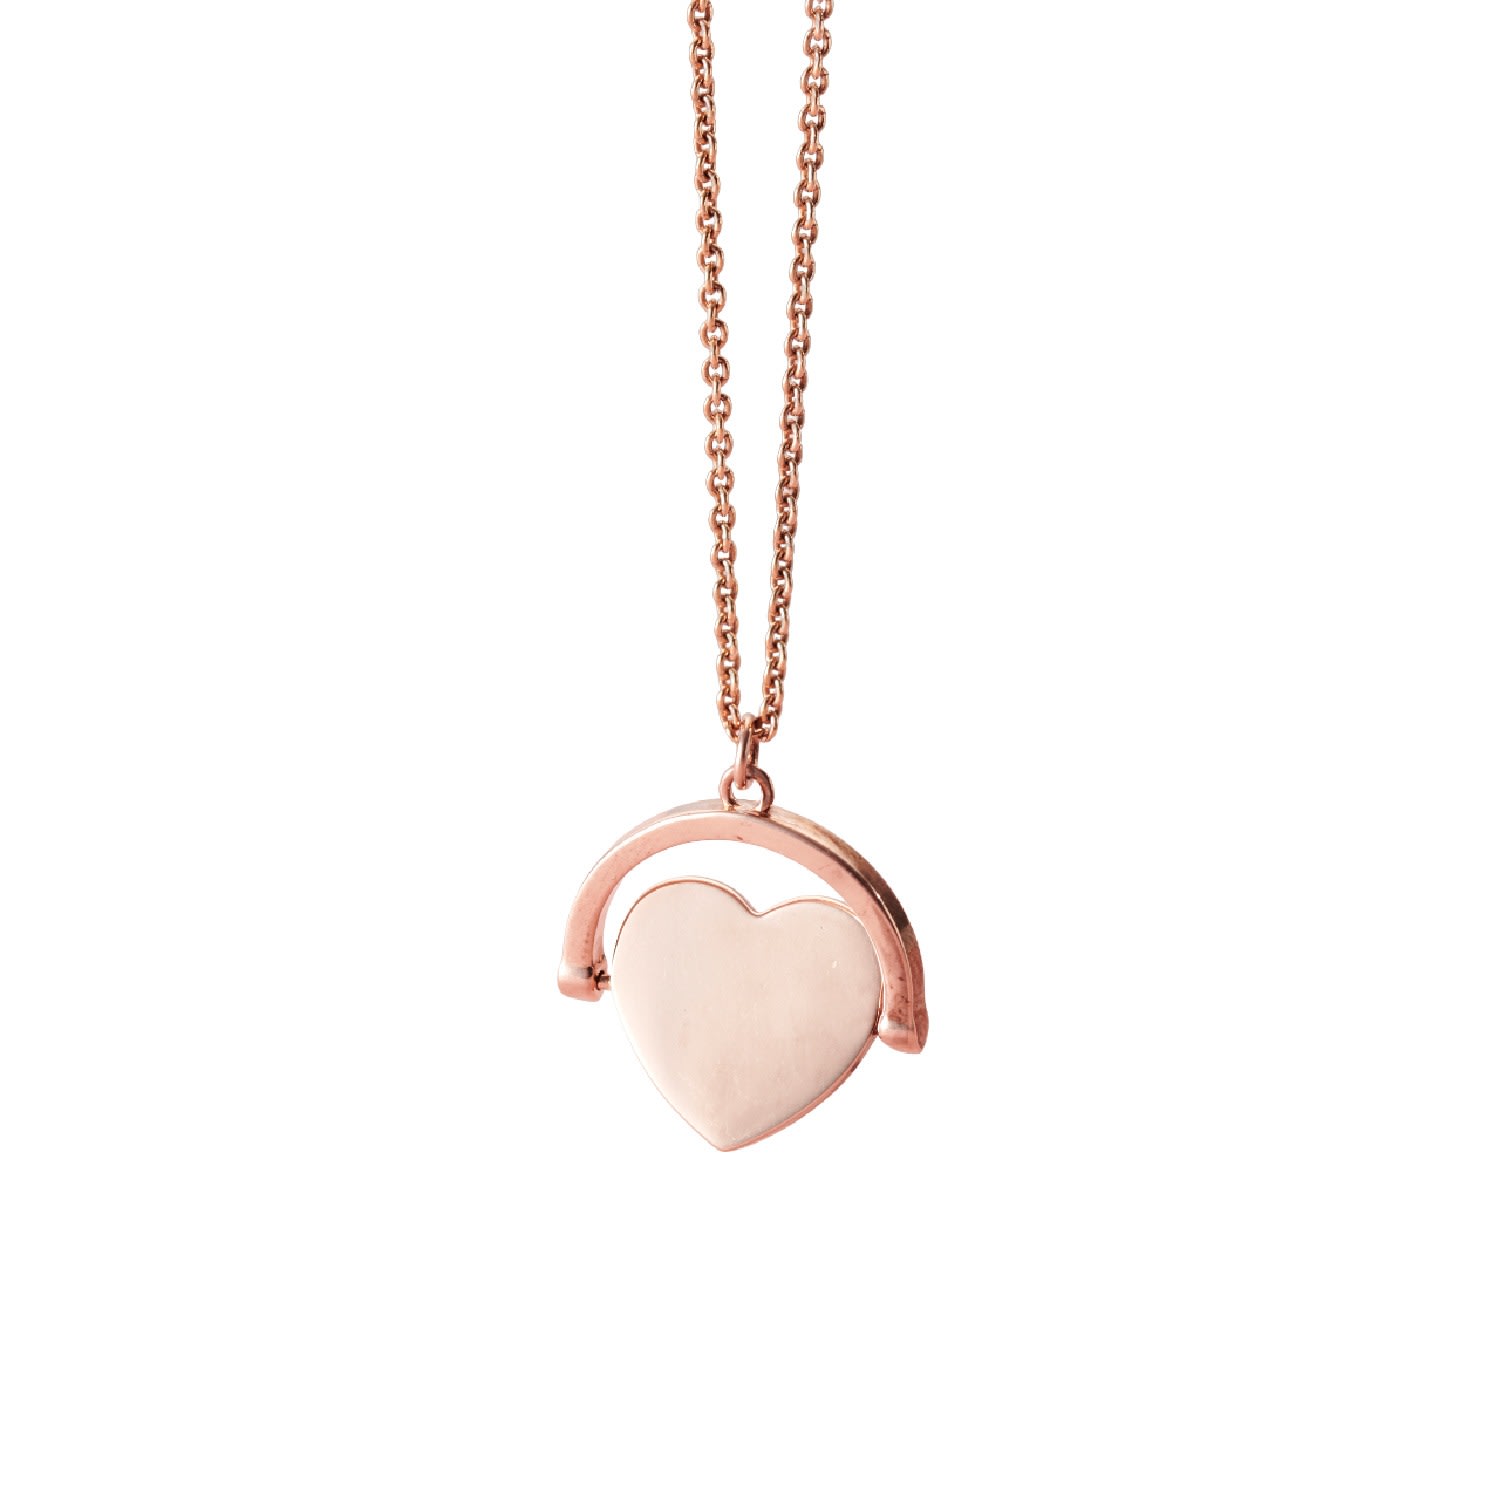 Women’s Rose Gold Plated Heart Spinner Necklace Posh Totty Designs